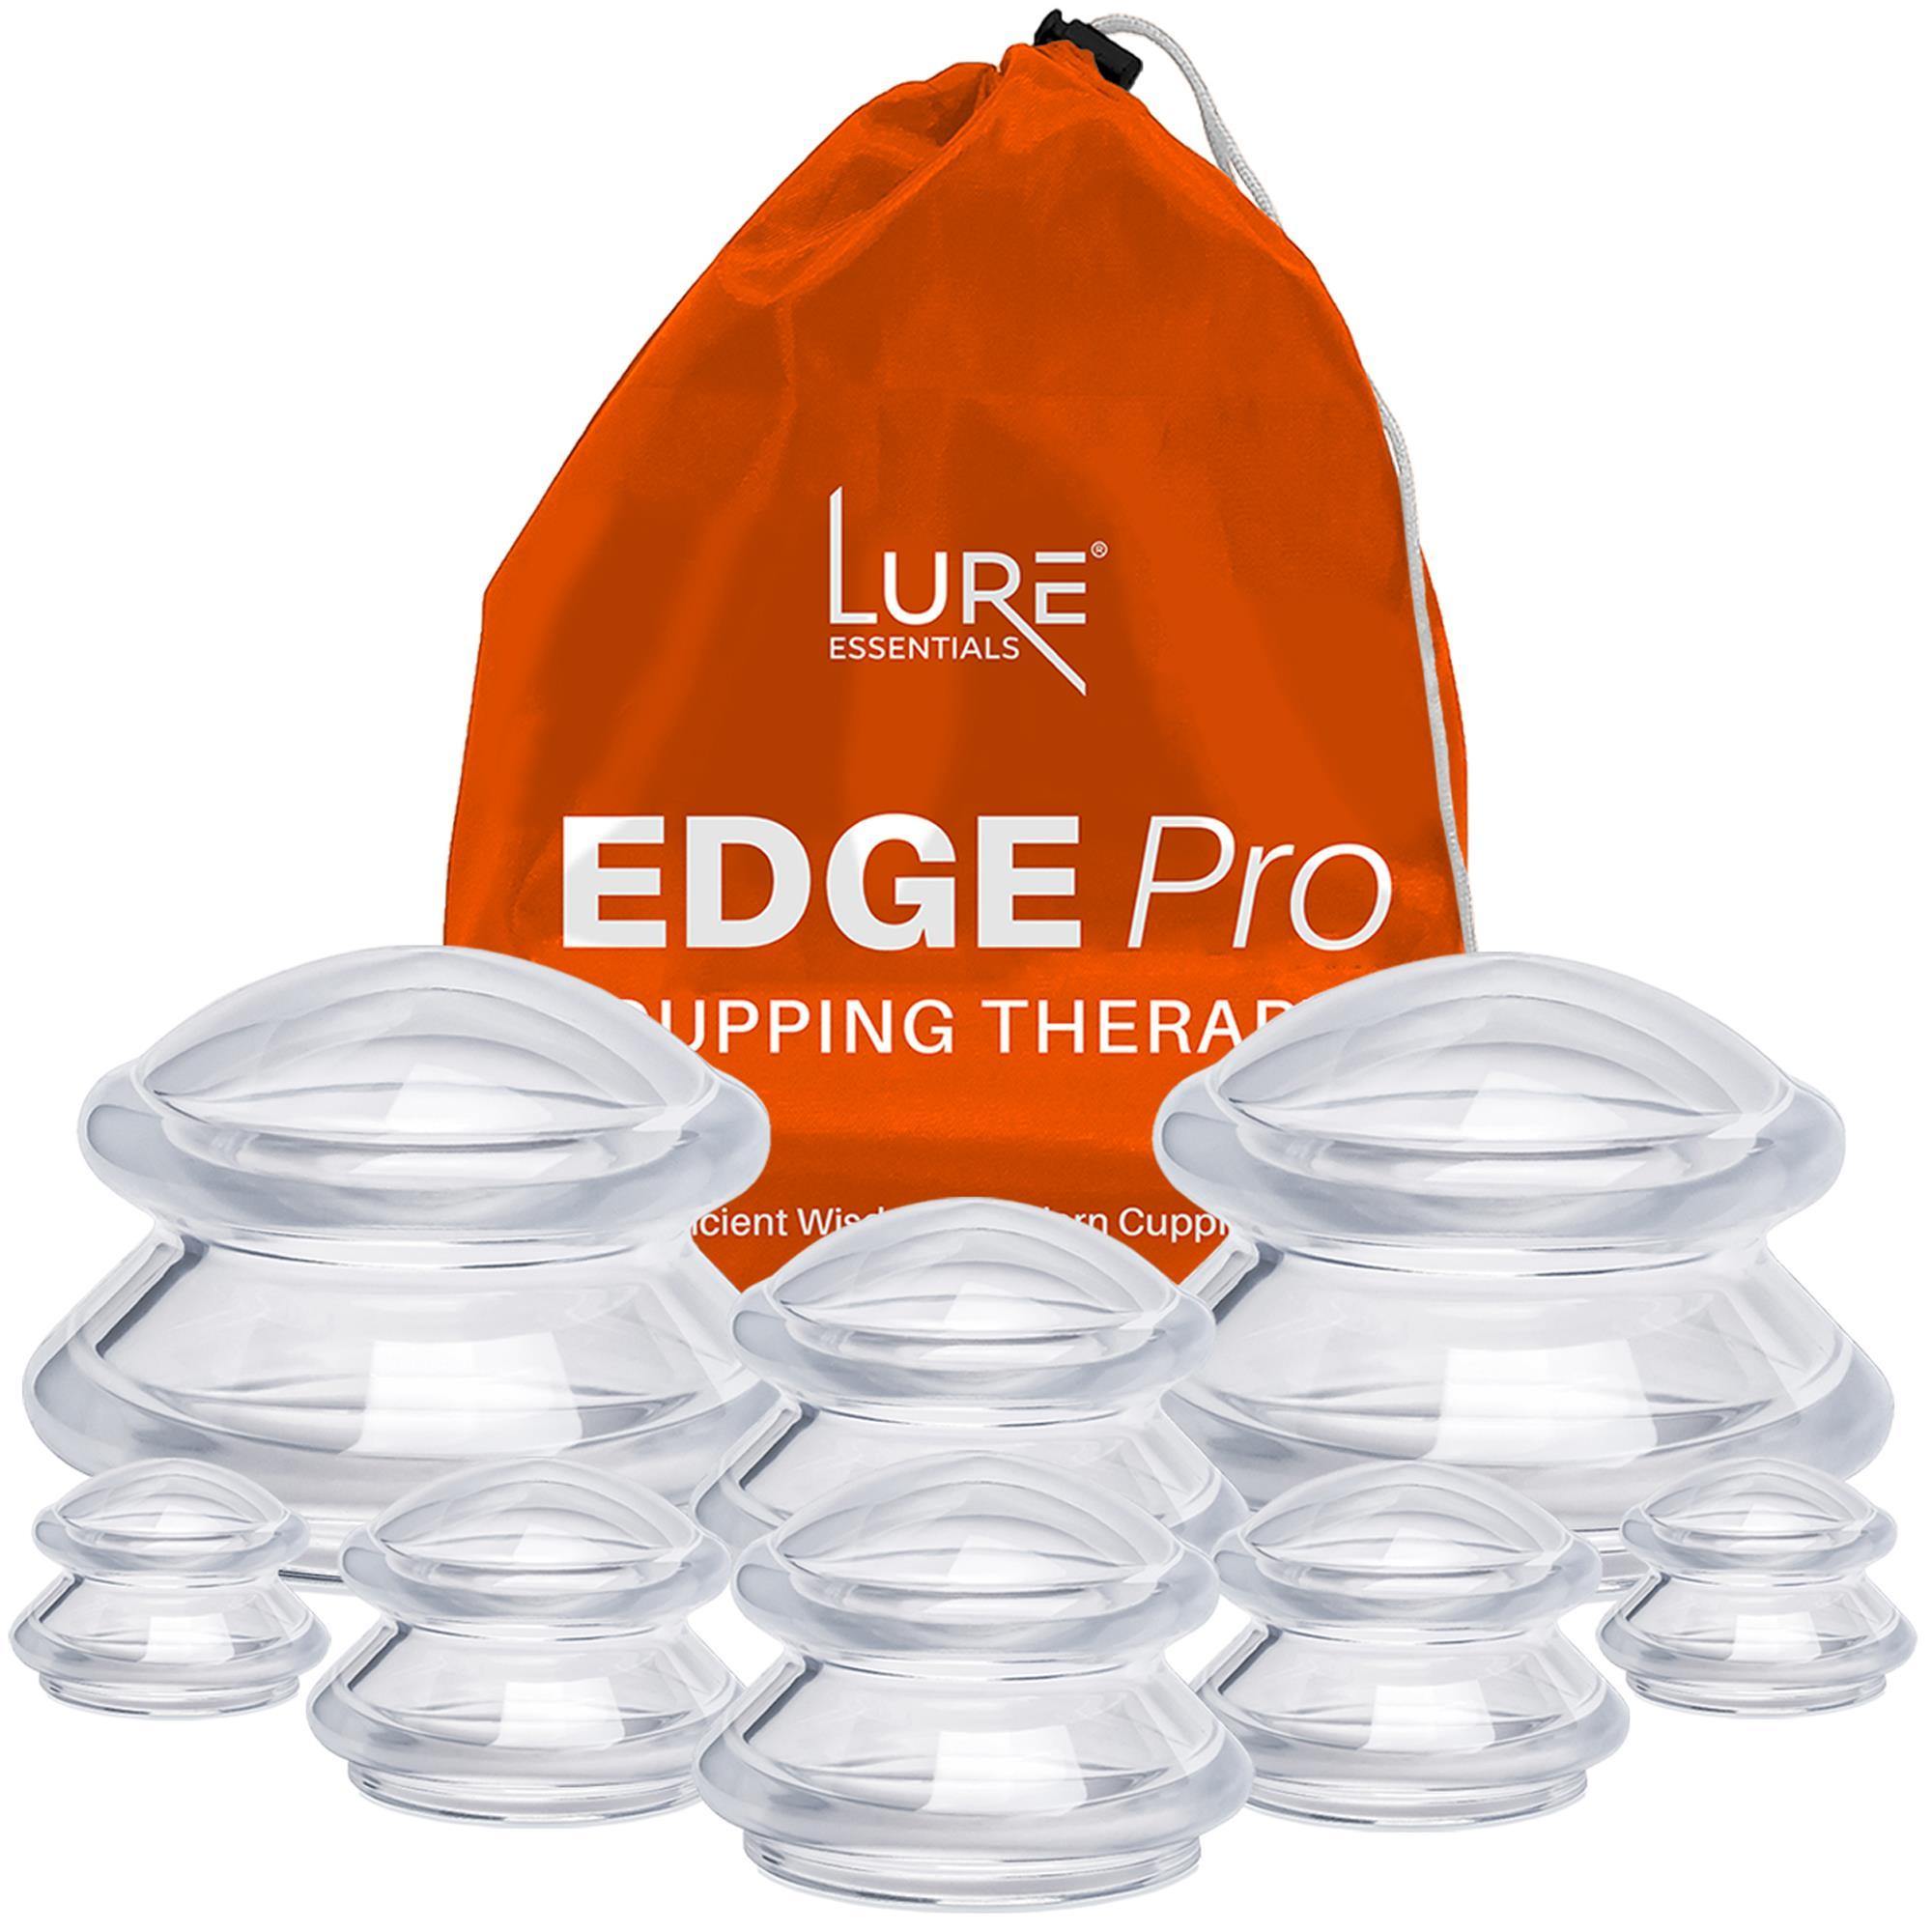 Lure Essentials Edge Pro Cupping Set Clear, 8 Cups